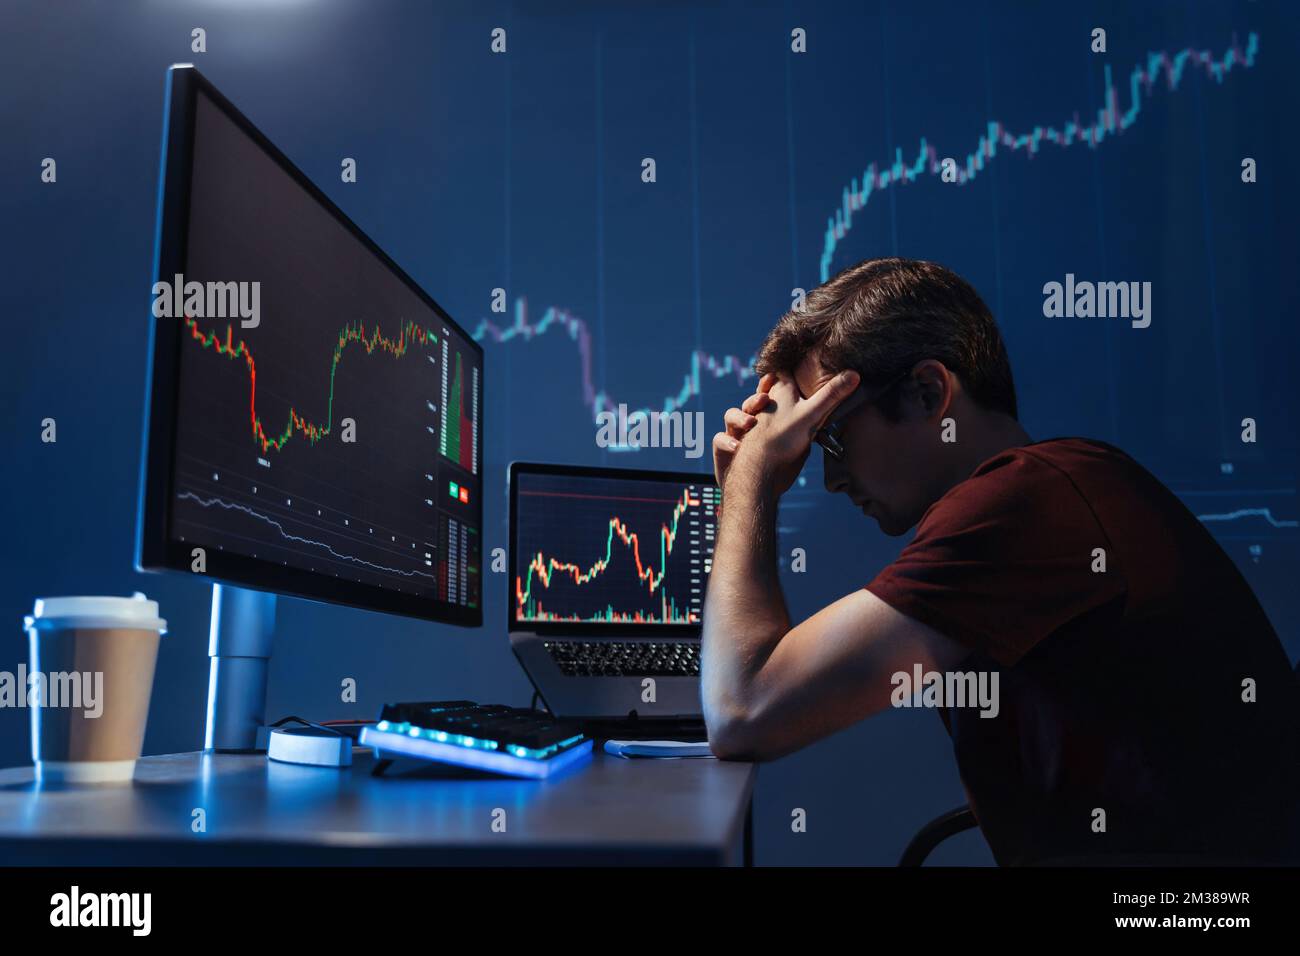 Side view of depressed thoughtful male crypto investor holding head in hands in front of computer with candlestick chart of crypto currency market, failed gaining money, upset with global recession Stock Photo